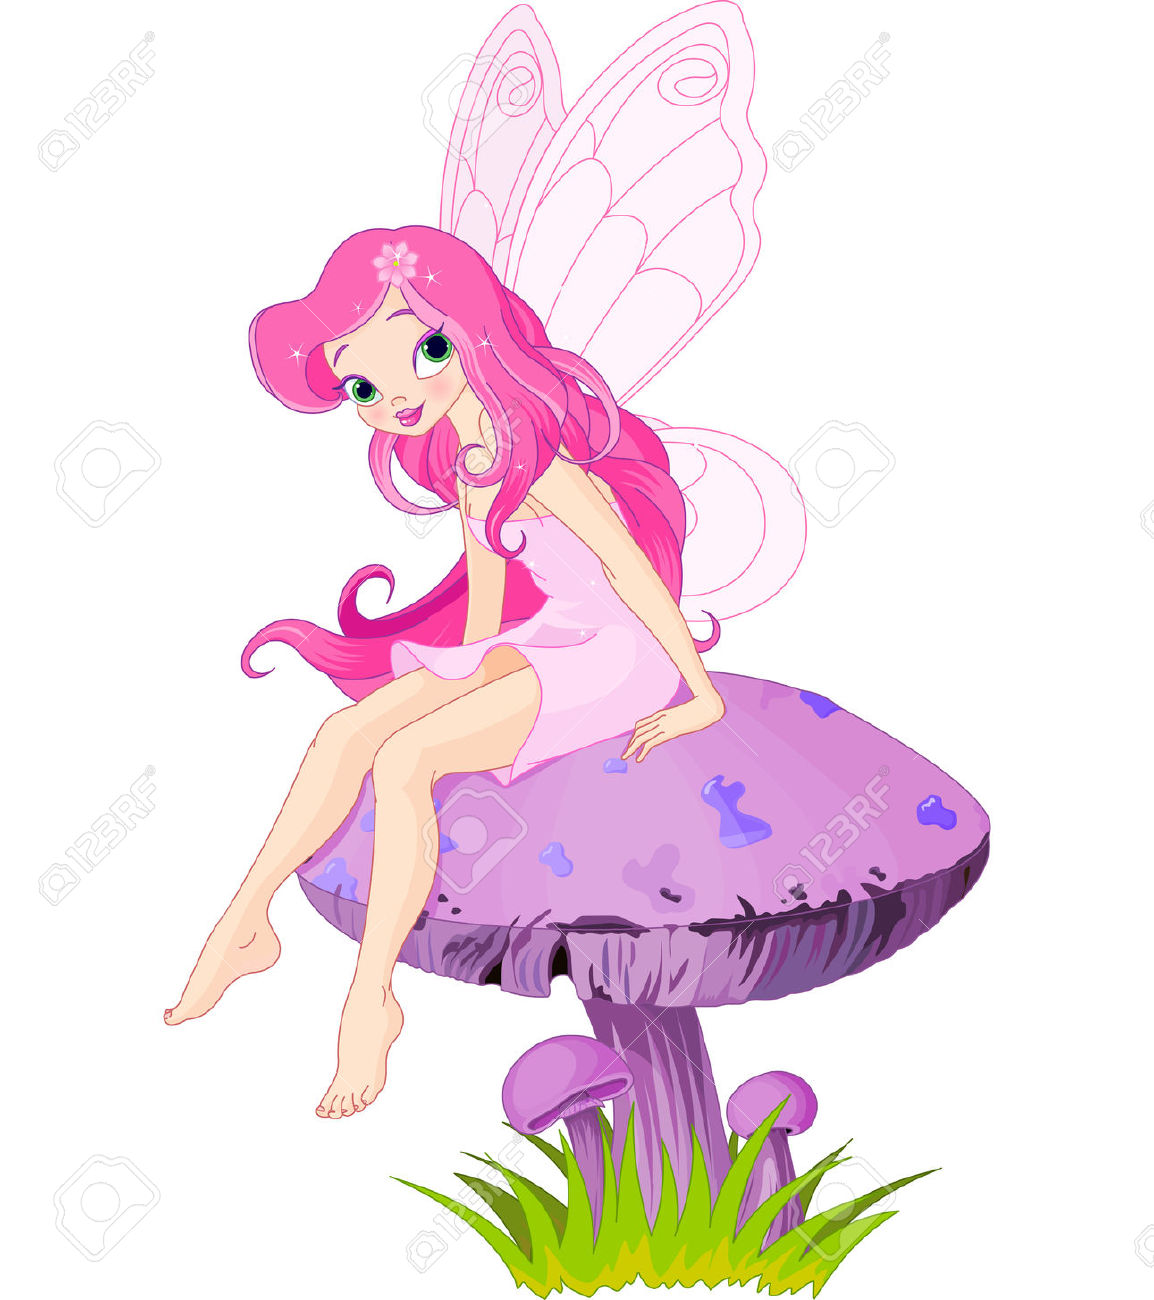 Pixie clipart #20, Download drawings